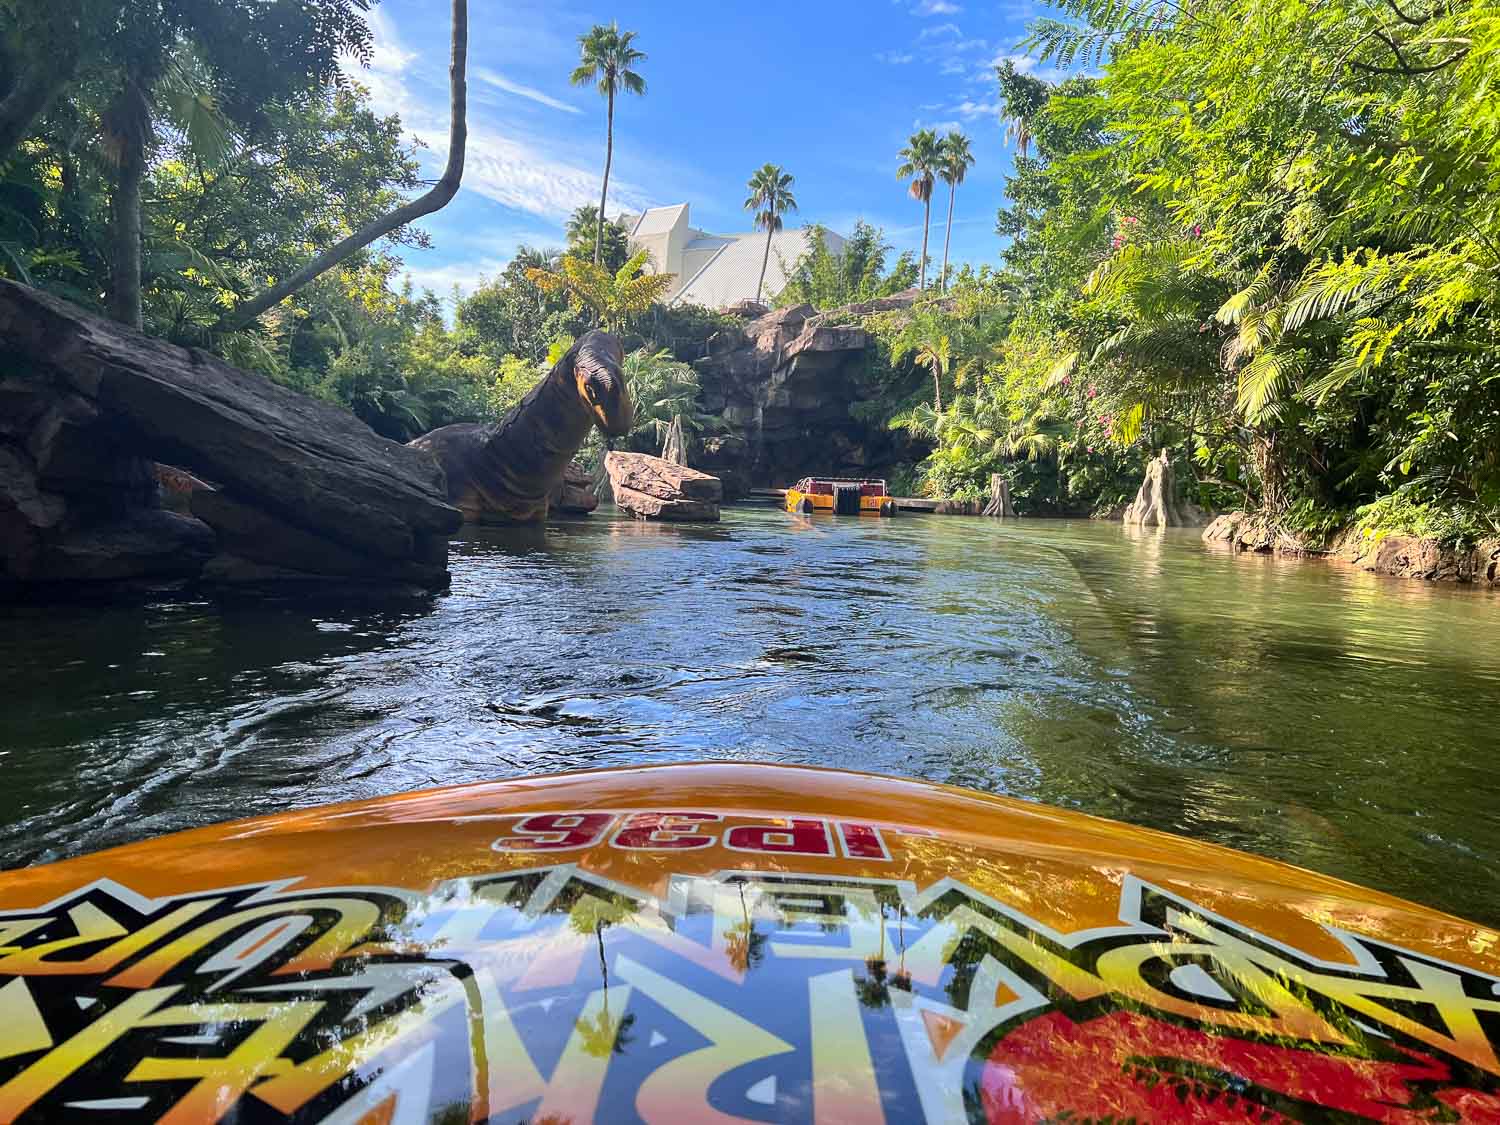 View from a raft on the Jurassic Park River Adventure ride, Islands of Adventure, Universal Orlando, Florida